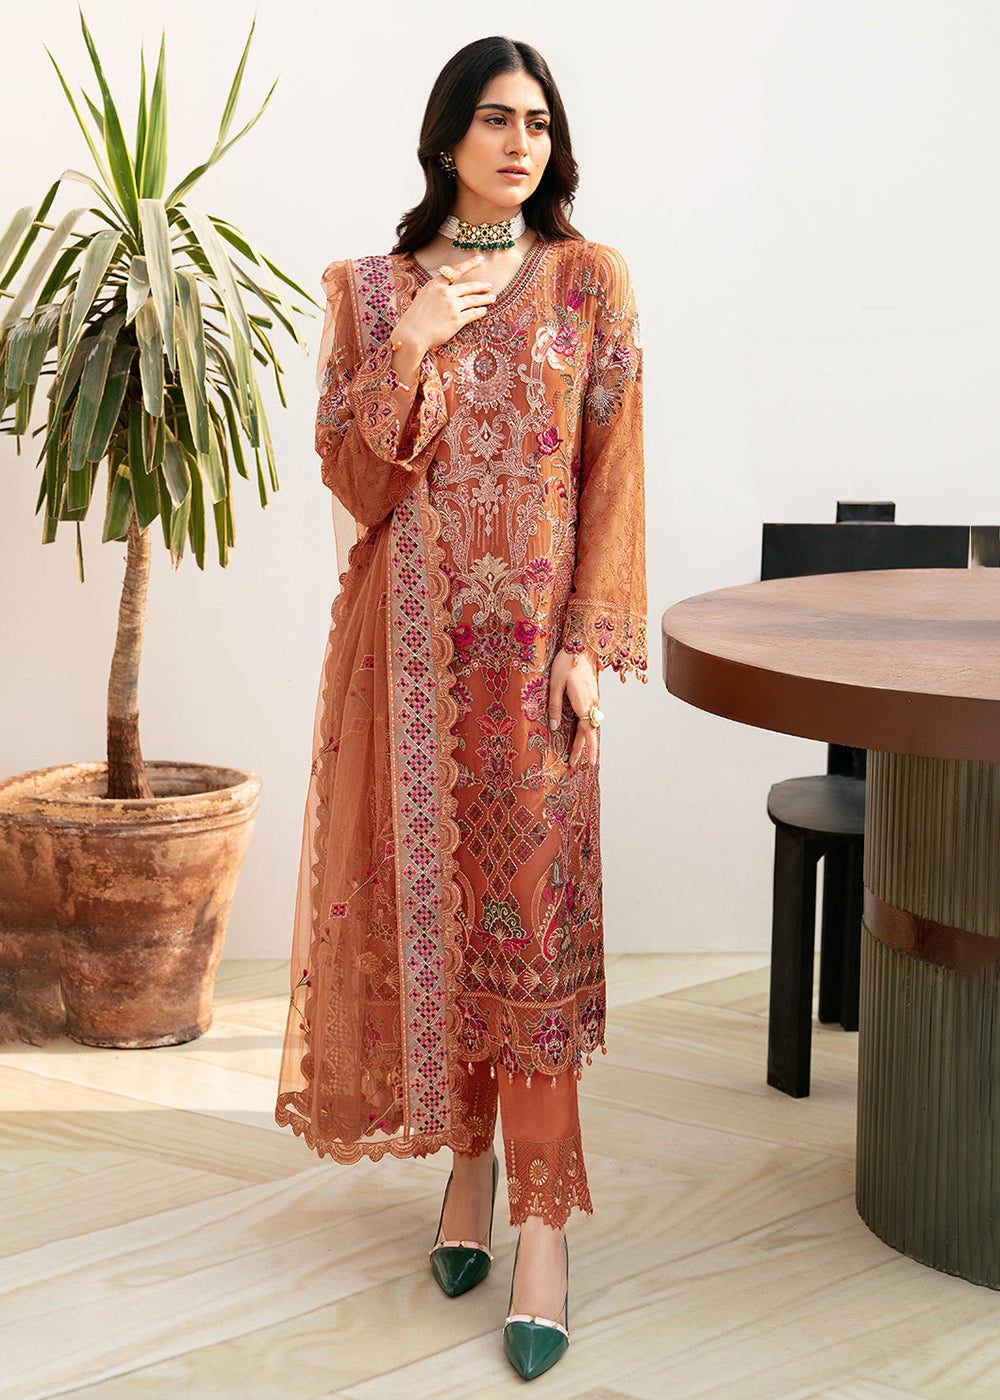 Buy Now Chevron Chiffon Collection Volume 8 by Ramsha | A-810 Online at Empress in USA, UK, Canada & Worldwide at Empress Clothing. 